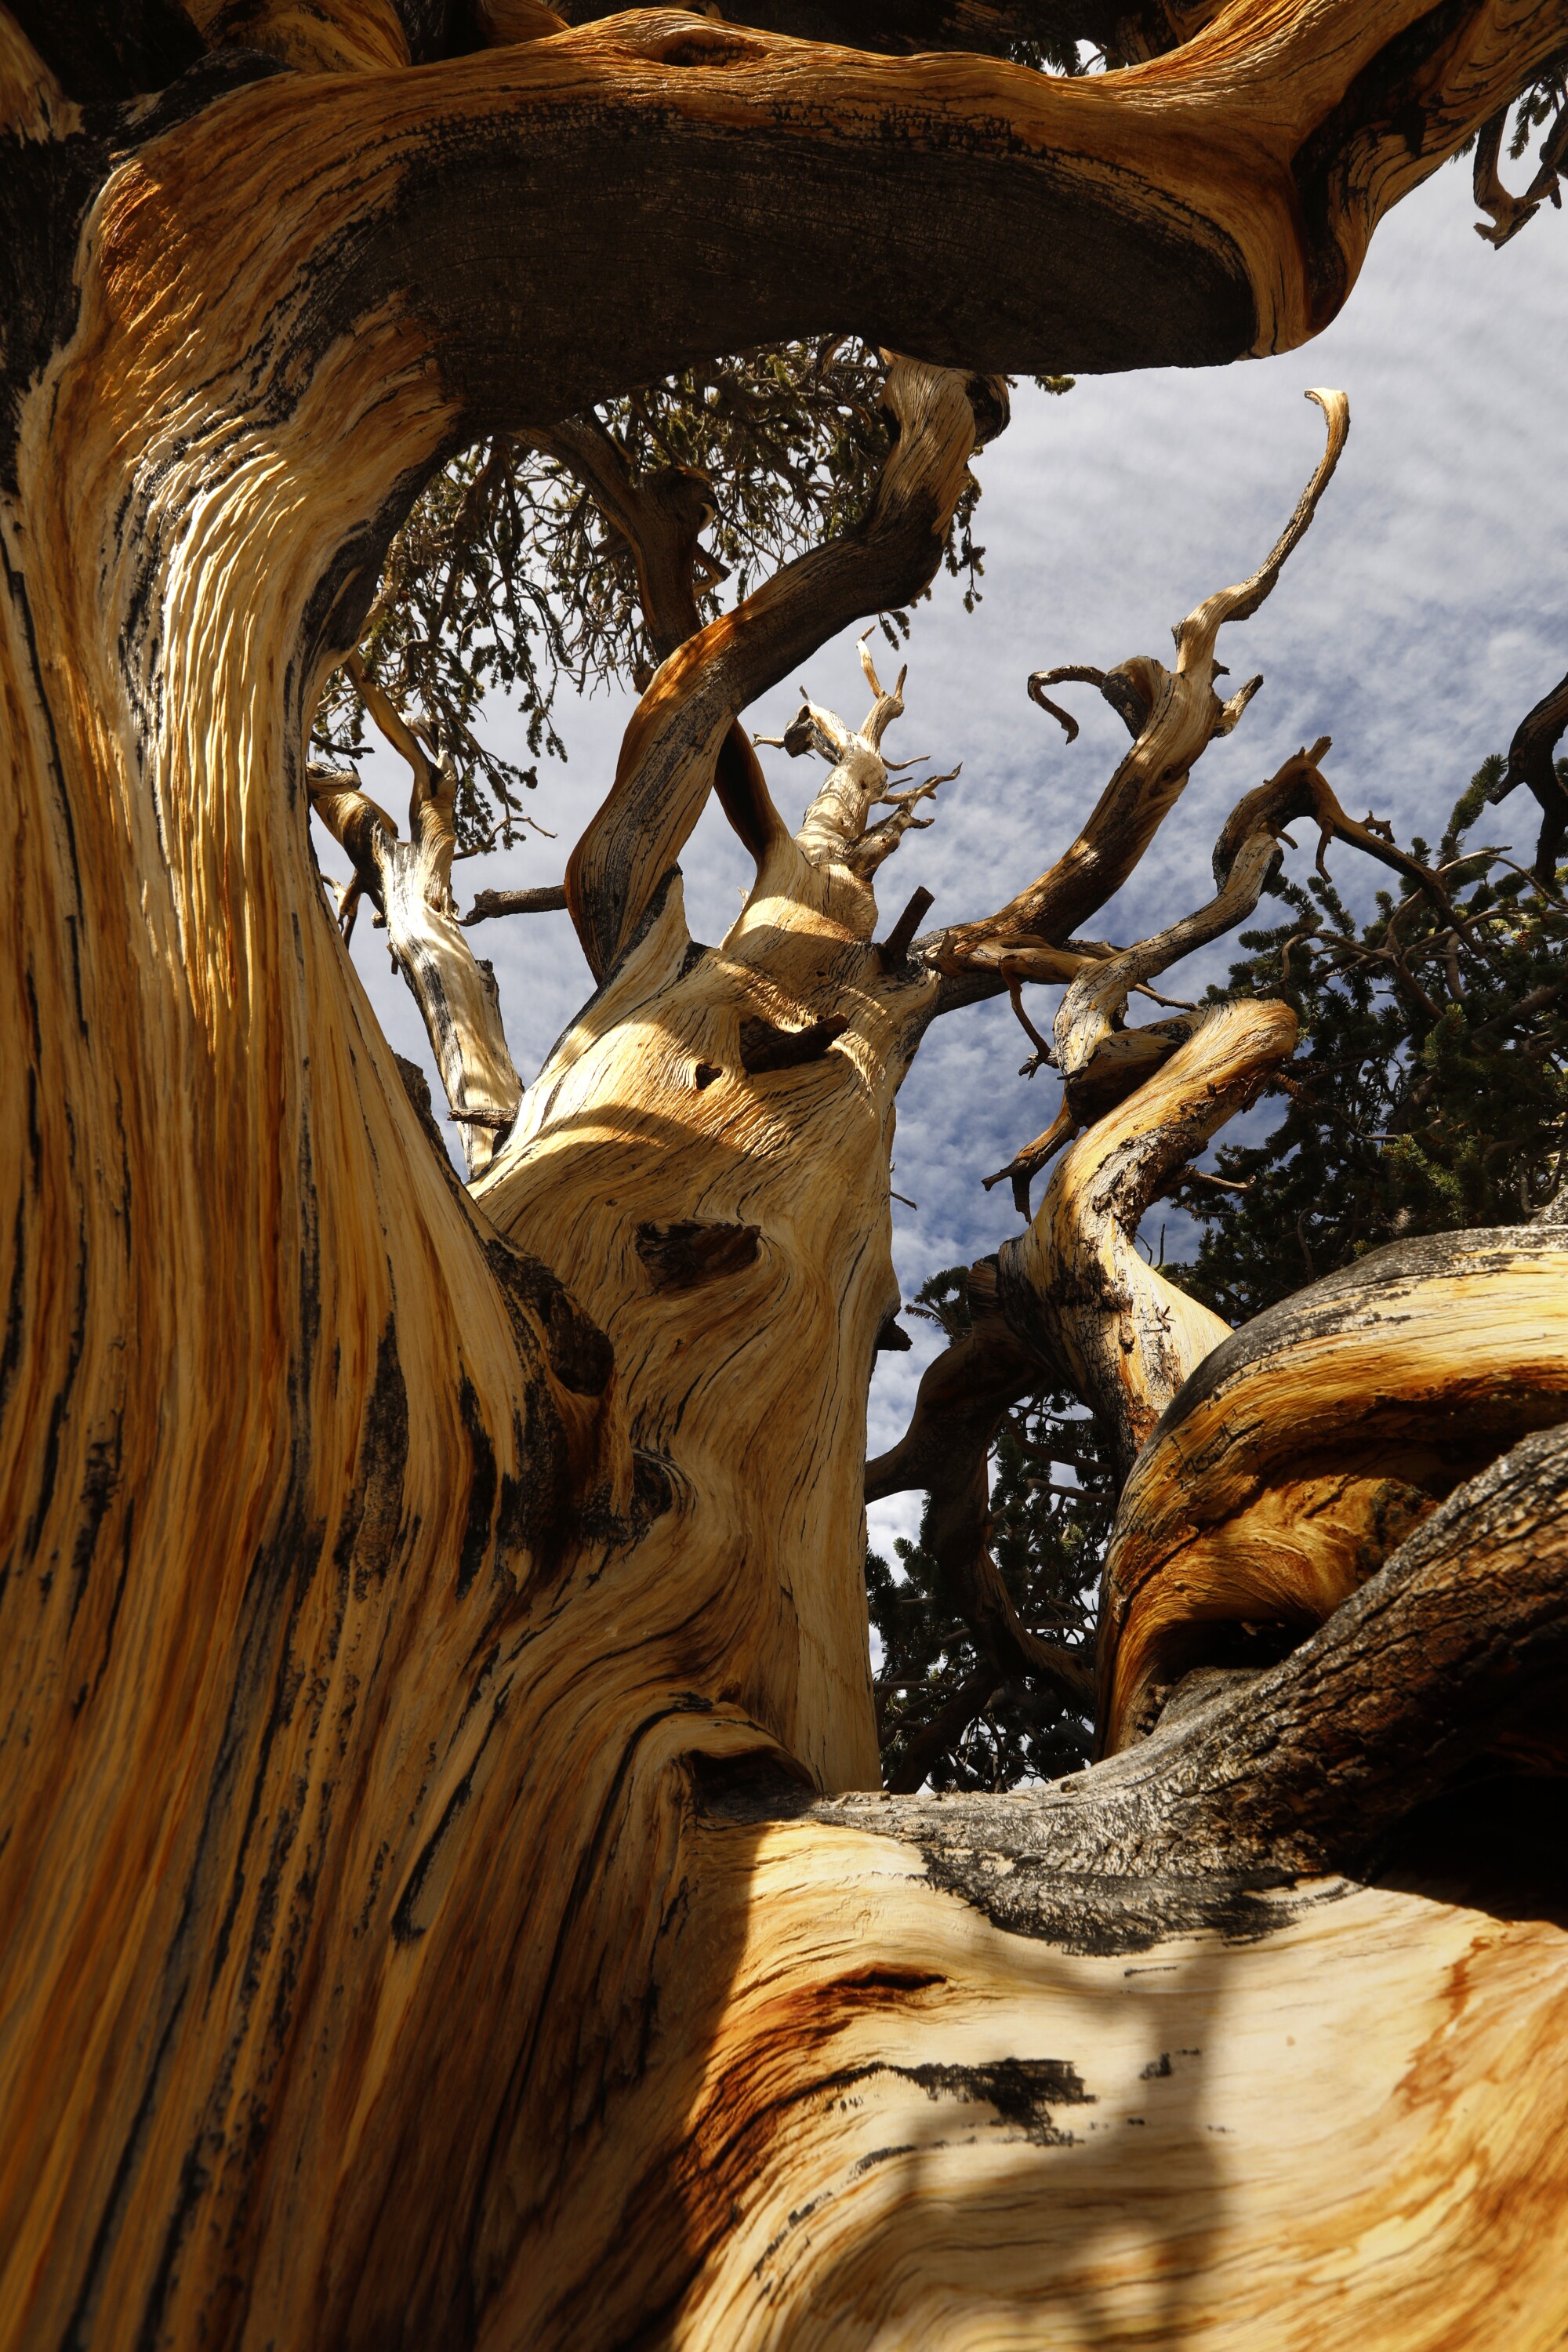 Intricately gnarled wood of a bristlecone pine